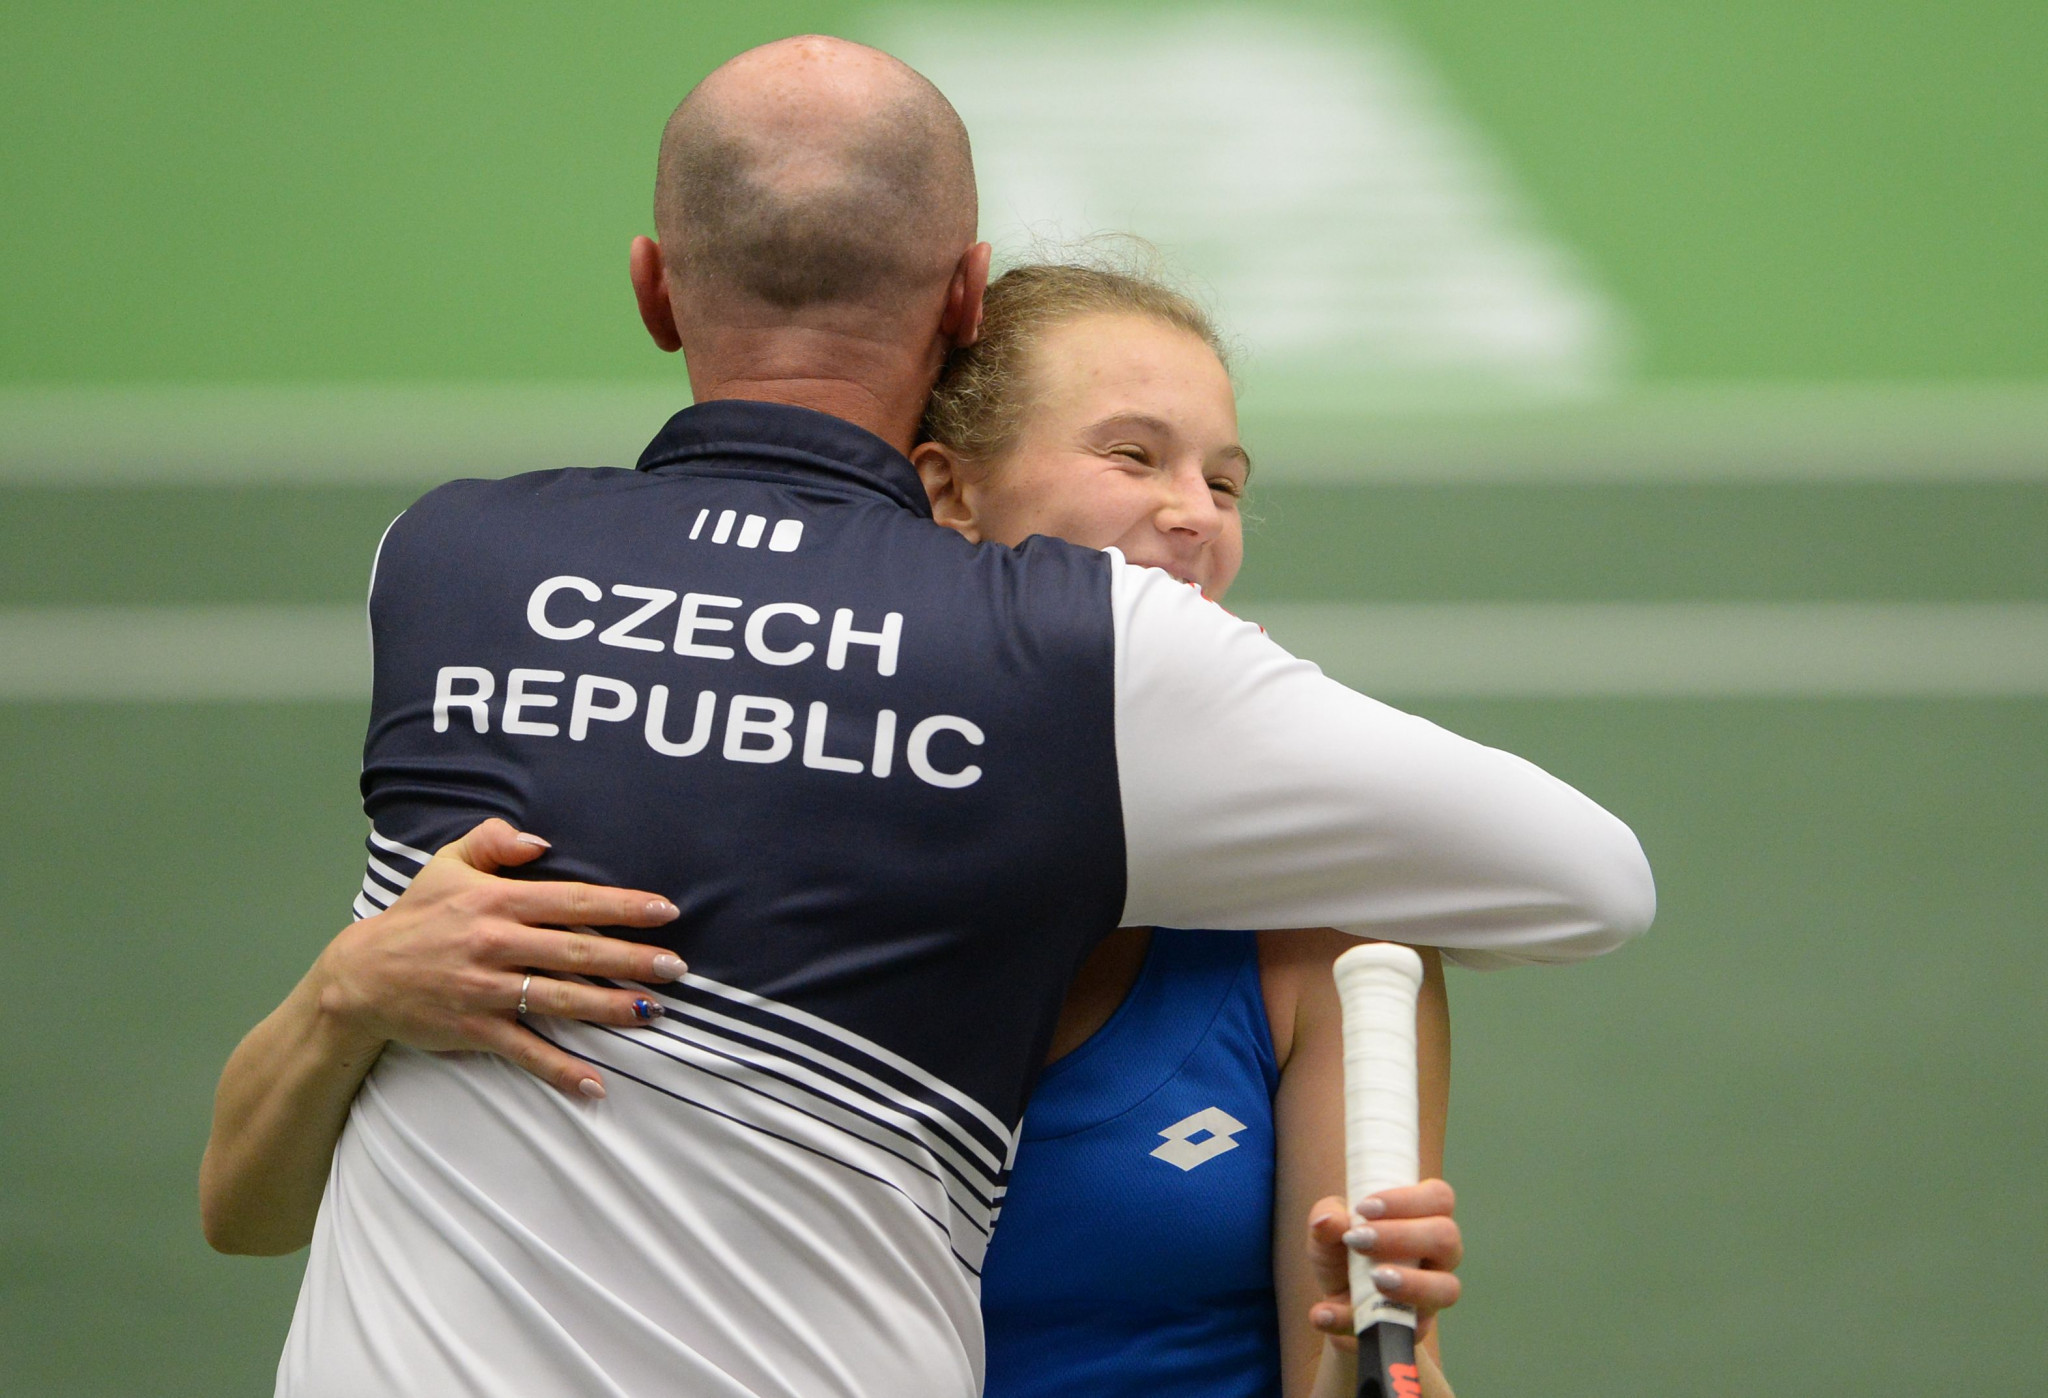 Czech Republic to face Canada in Fed Cup World Group play-off